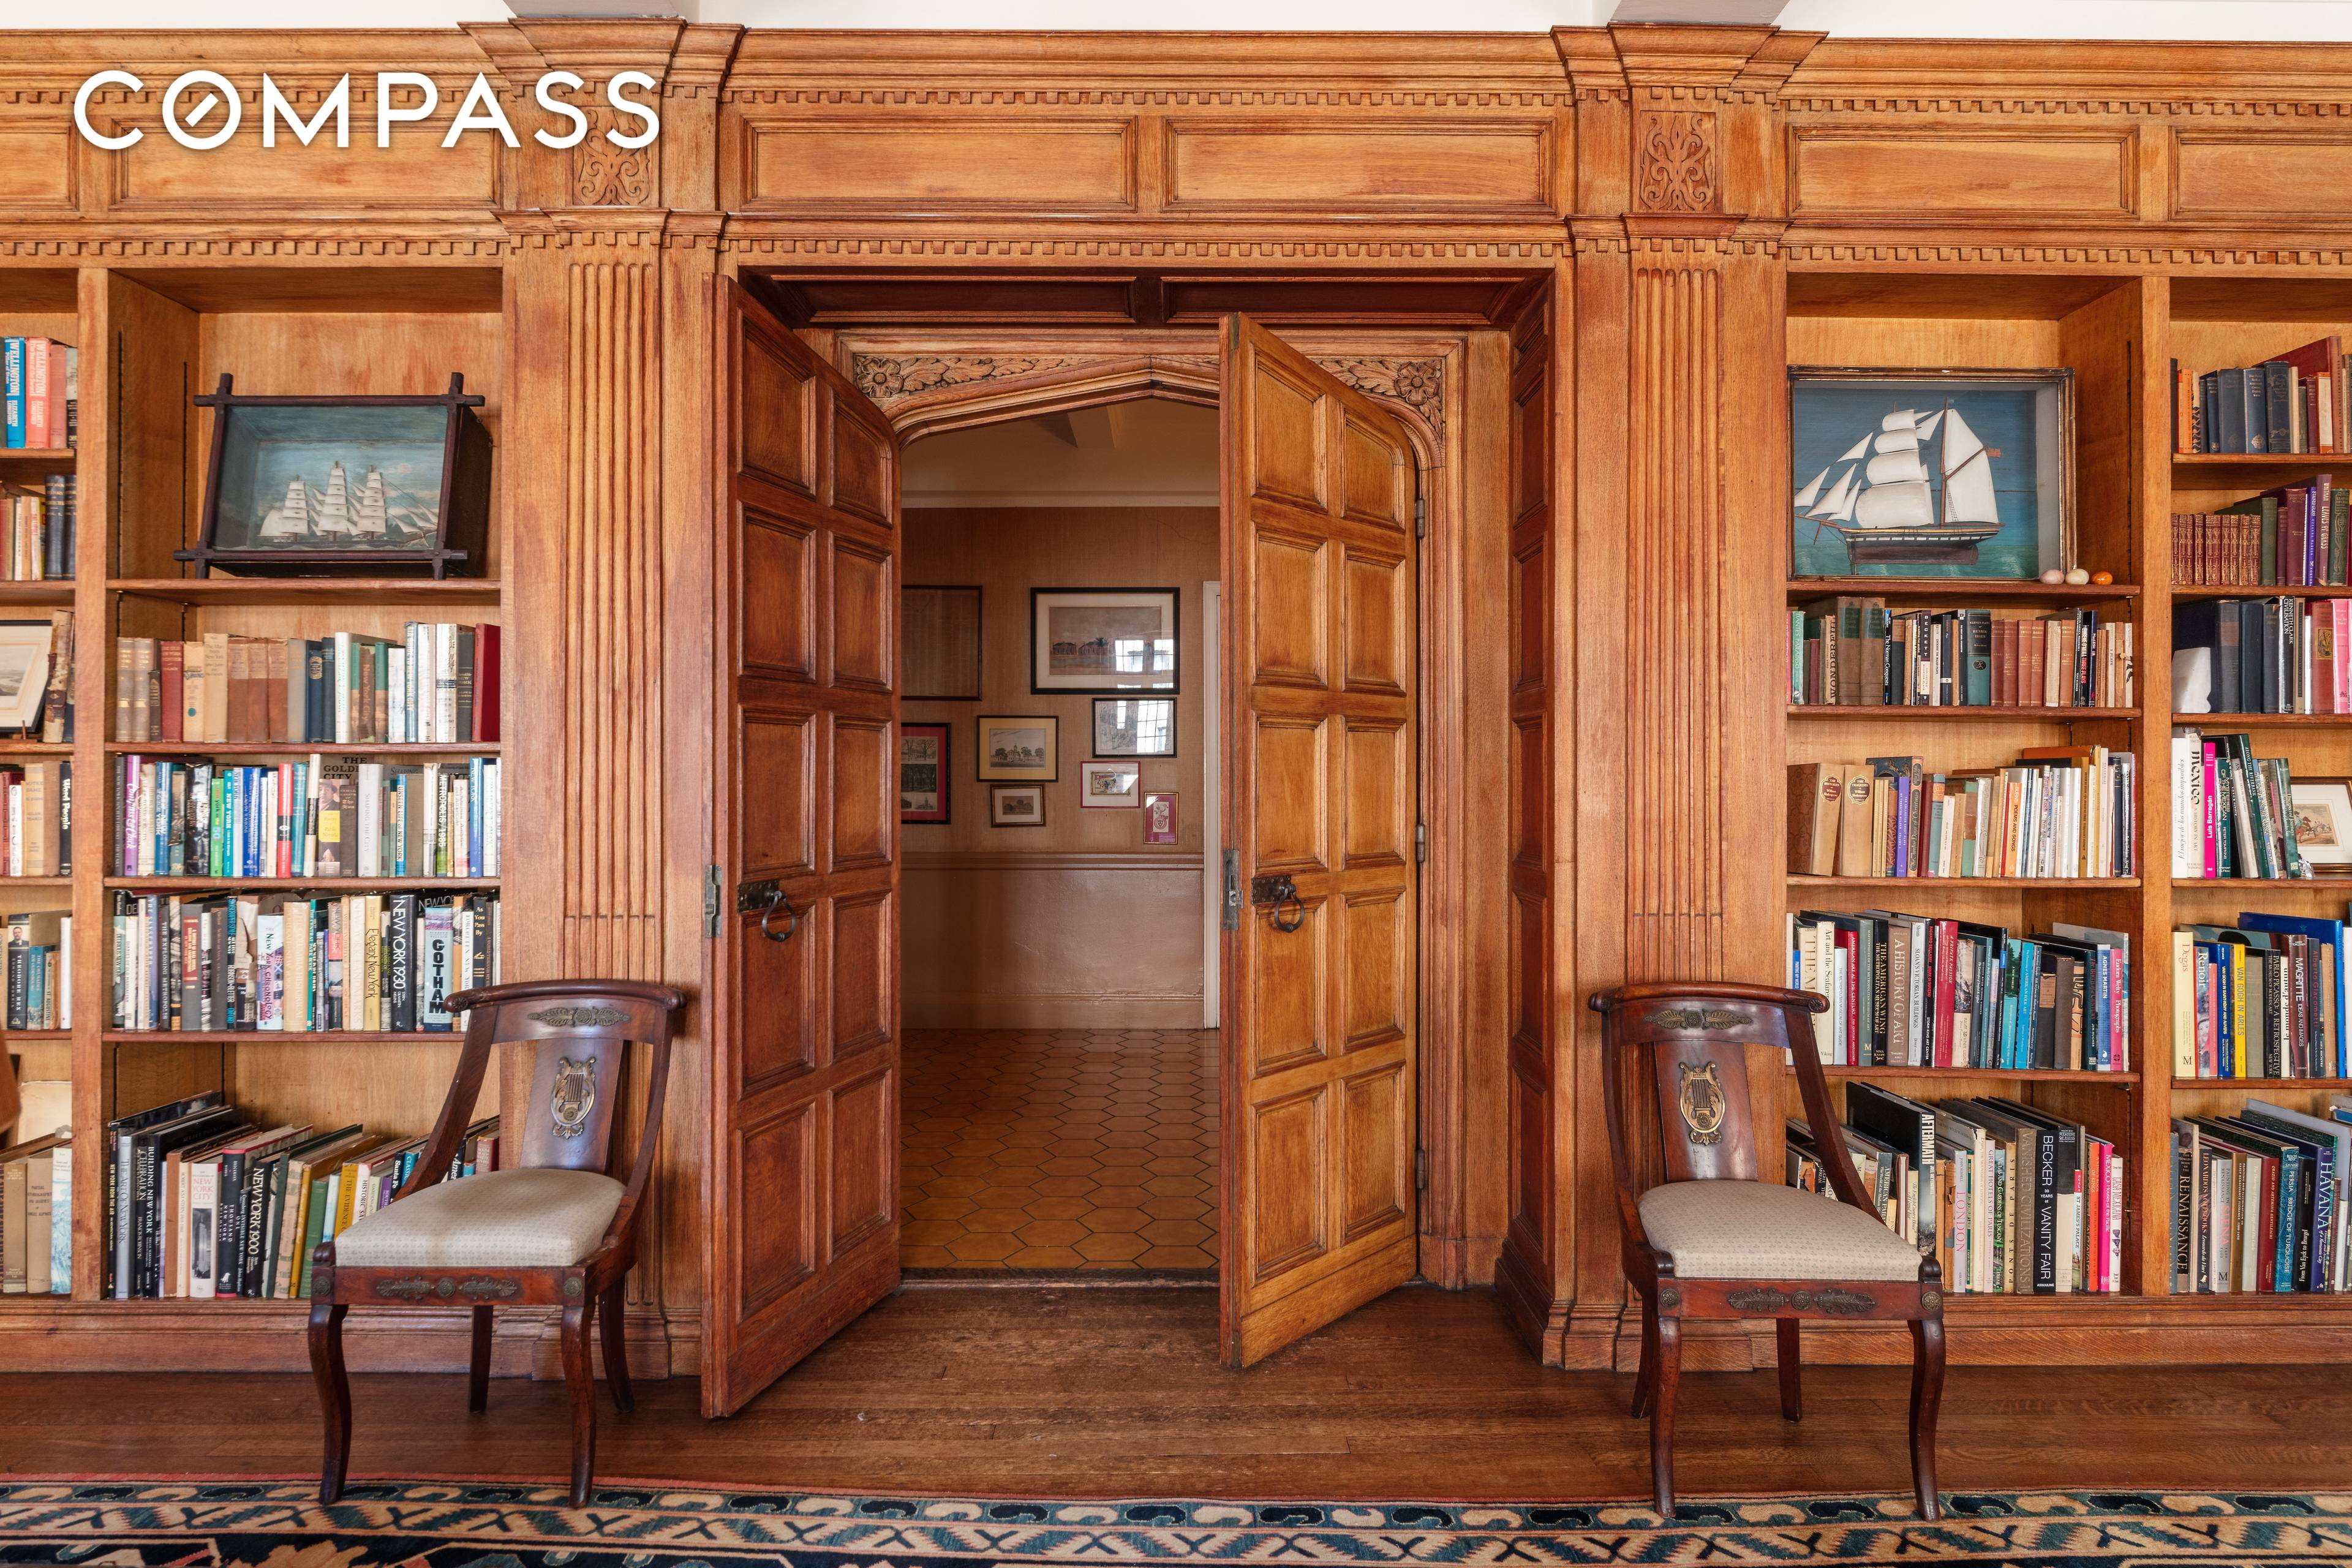 Originally built in 1924 by renowned architects Rouse and Goldstone This full floor residence at 151 East 79 Street, is an architectural masterpiece.